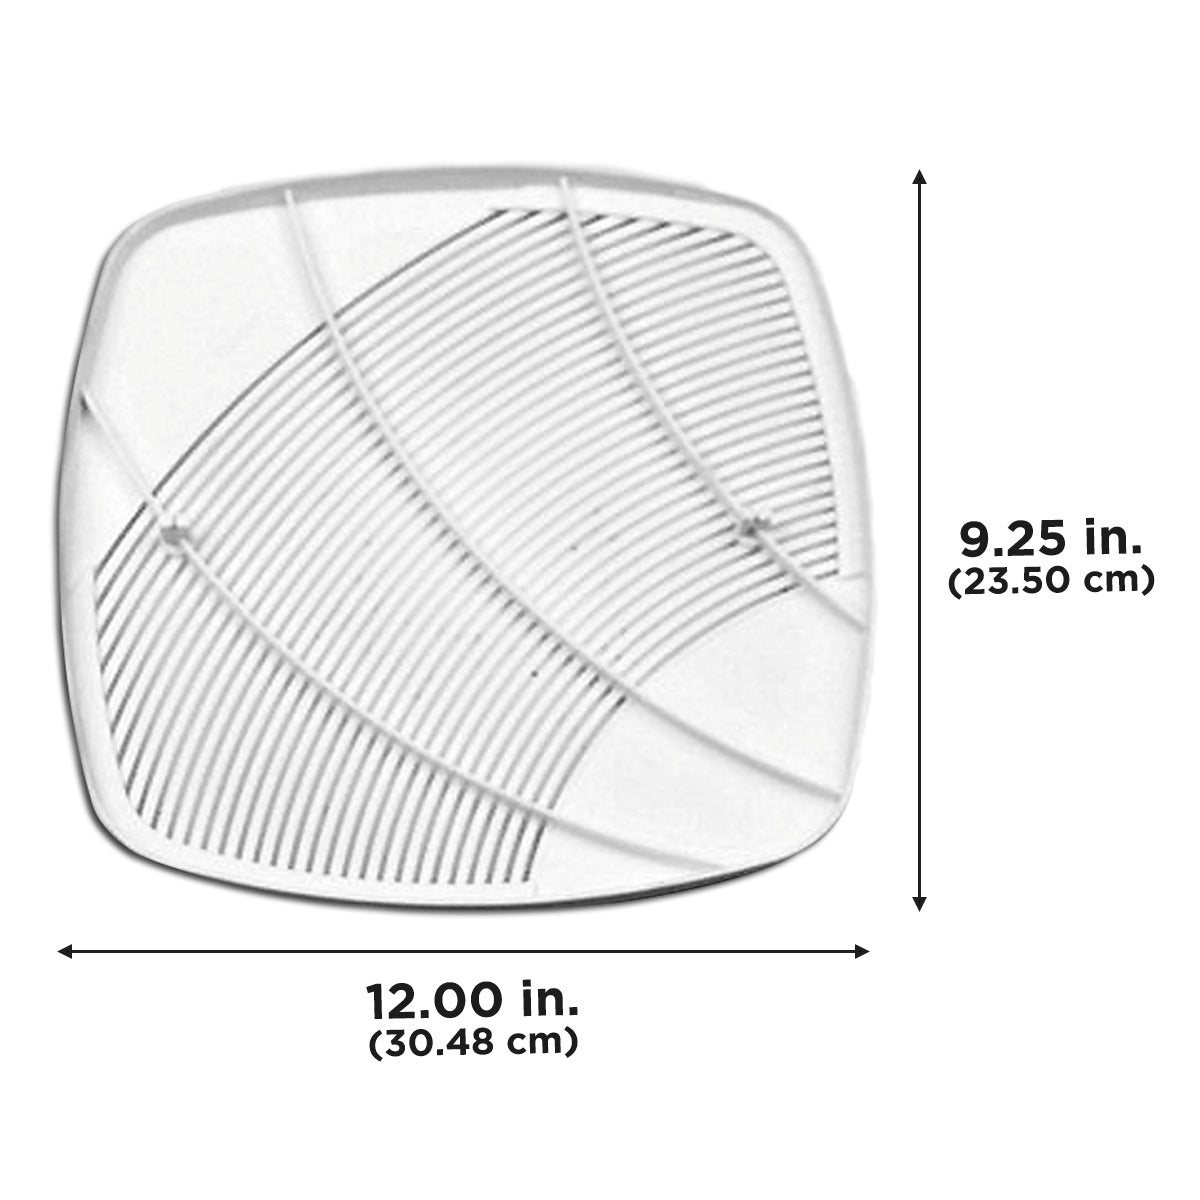 The grille measures 9.25 in. (23.5 cm) long and 12 in. (30.48 cm) wide.